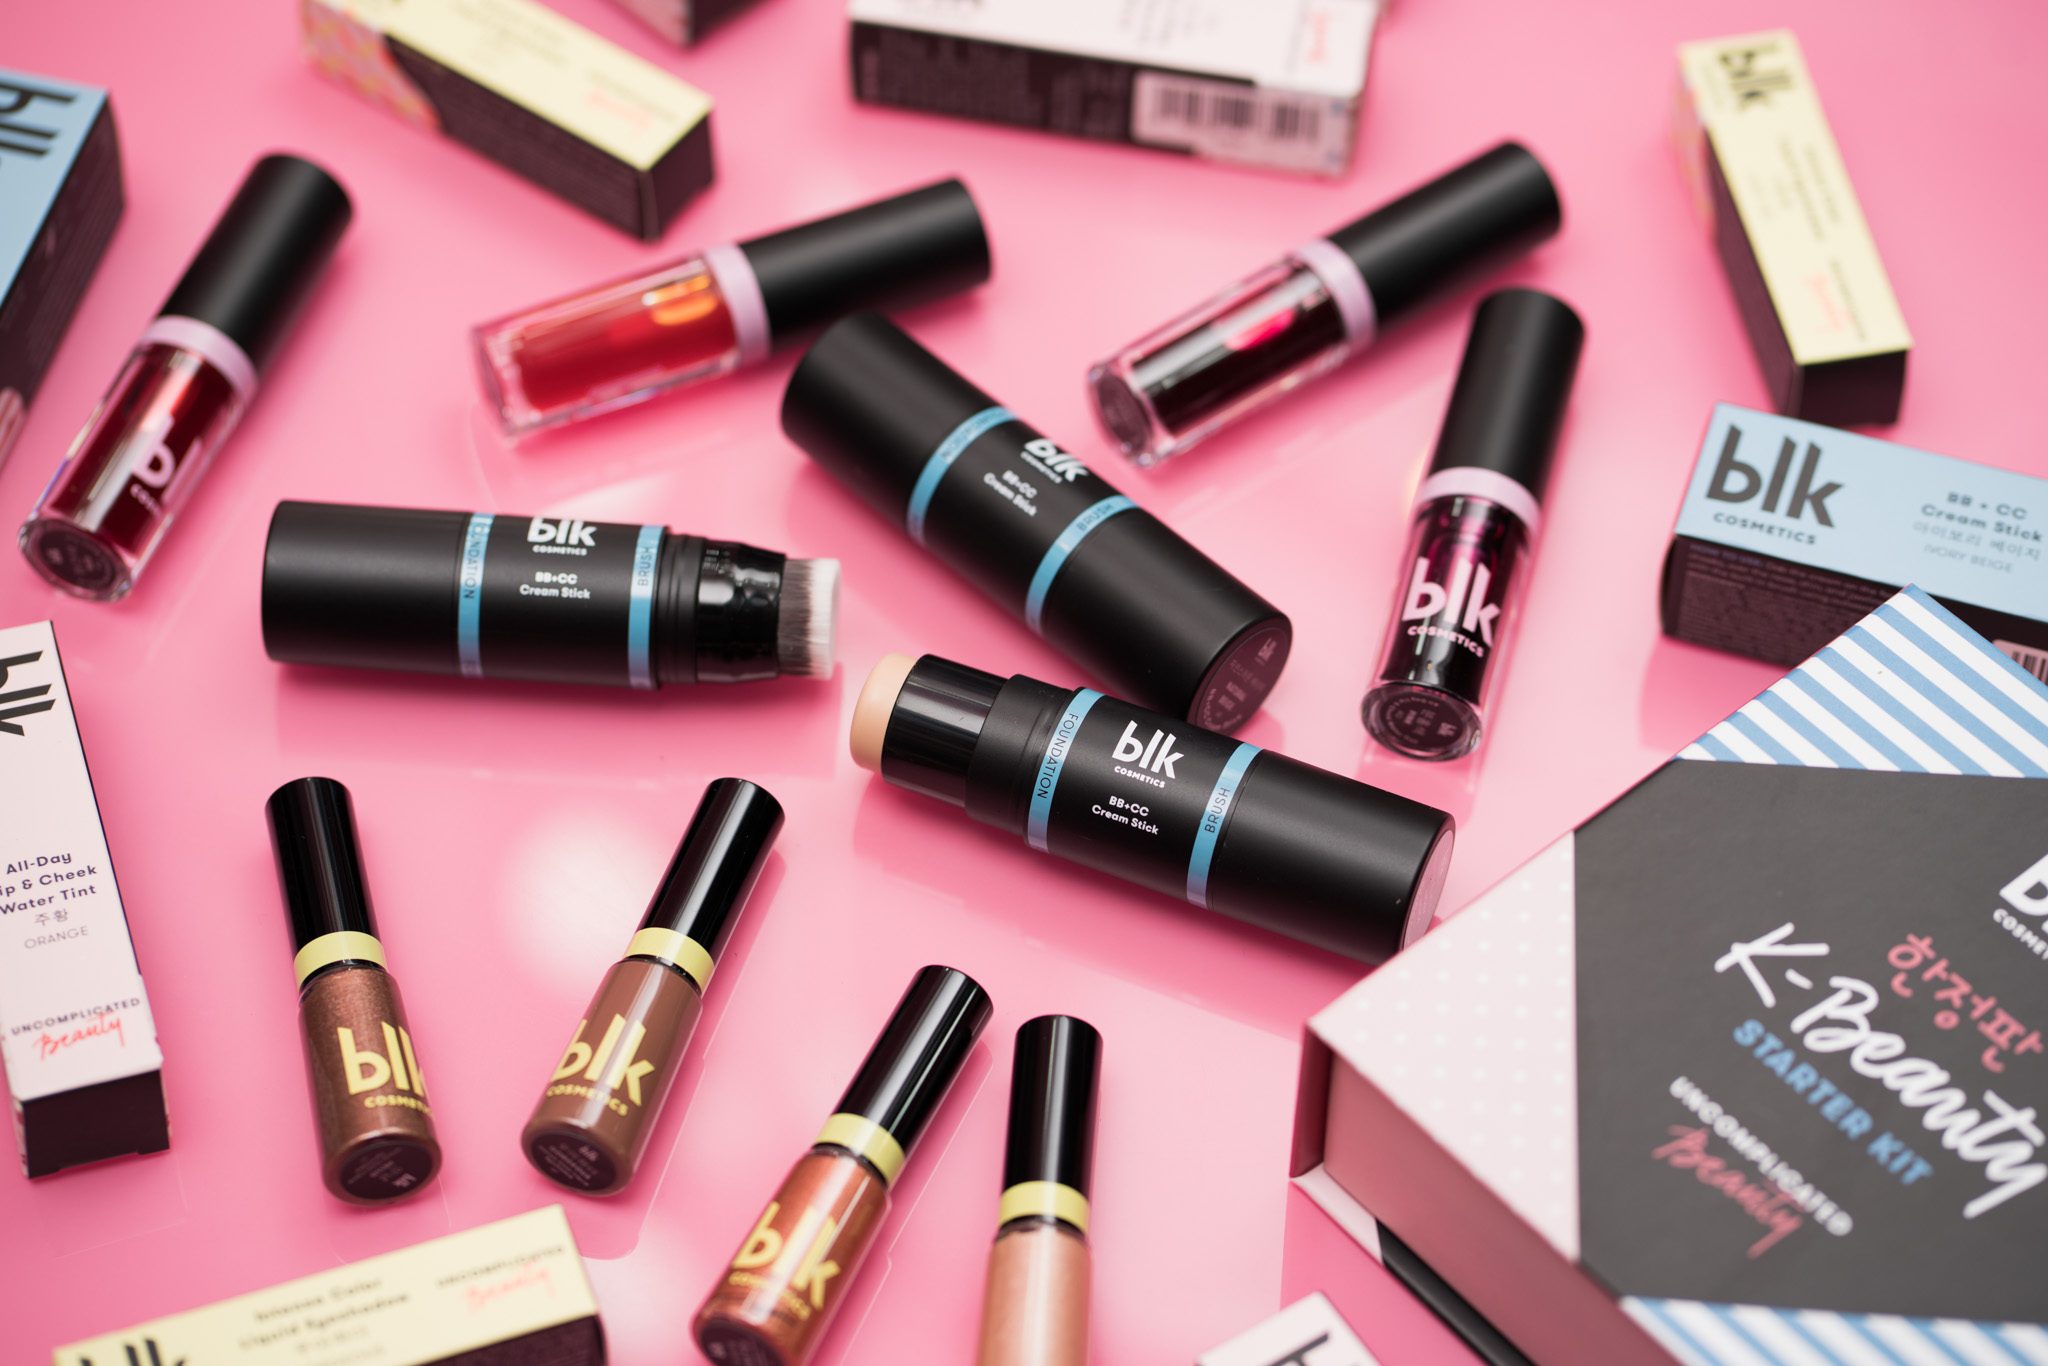 SNEAK PEEK: blk Cosmetics’ summer collection is all about K-beauty